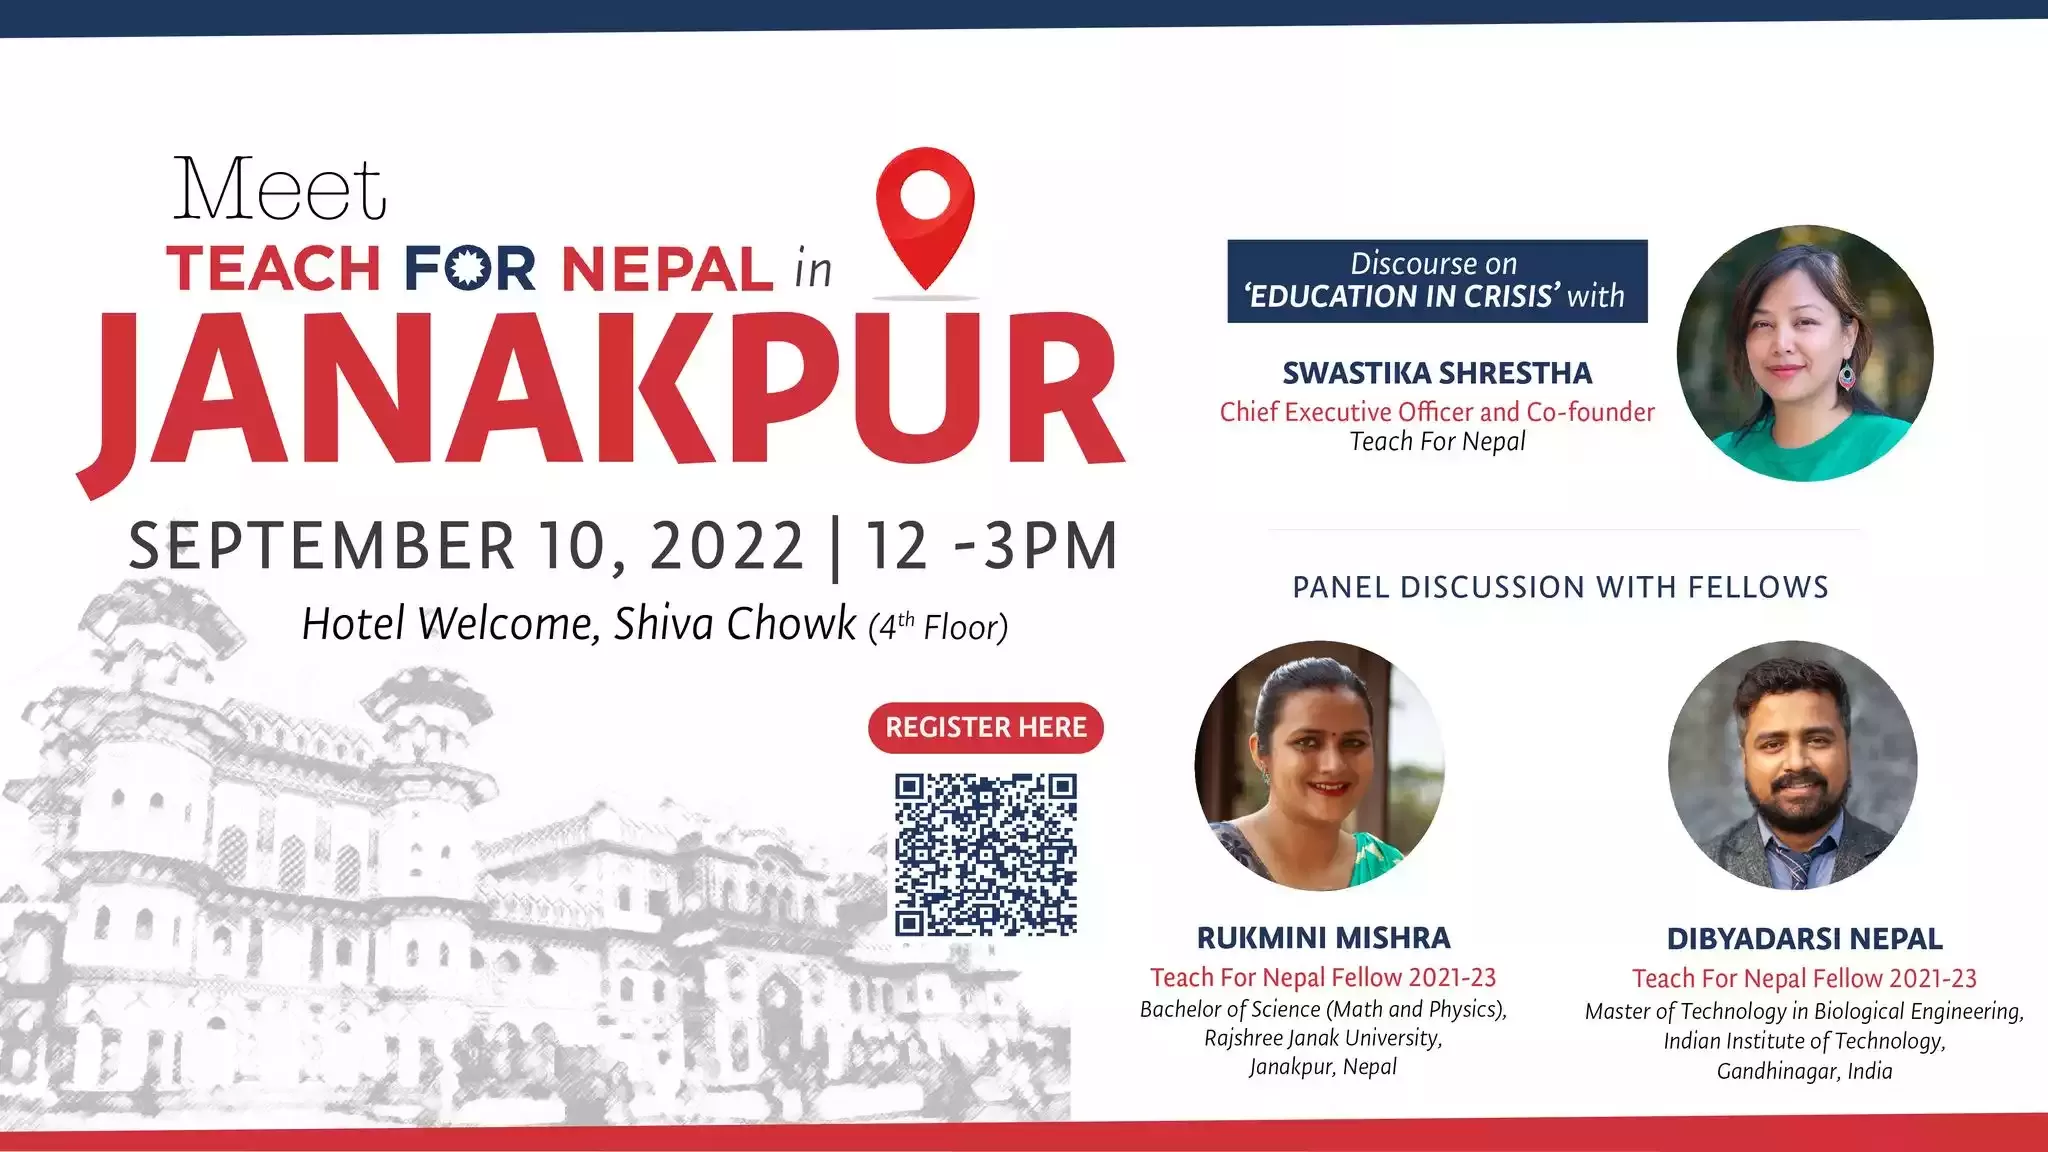 Meet Teach For Nepal in Janakpur at Hotel Welcome, Shiva Chowk